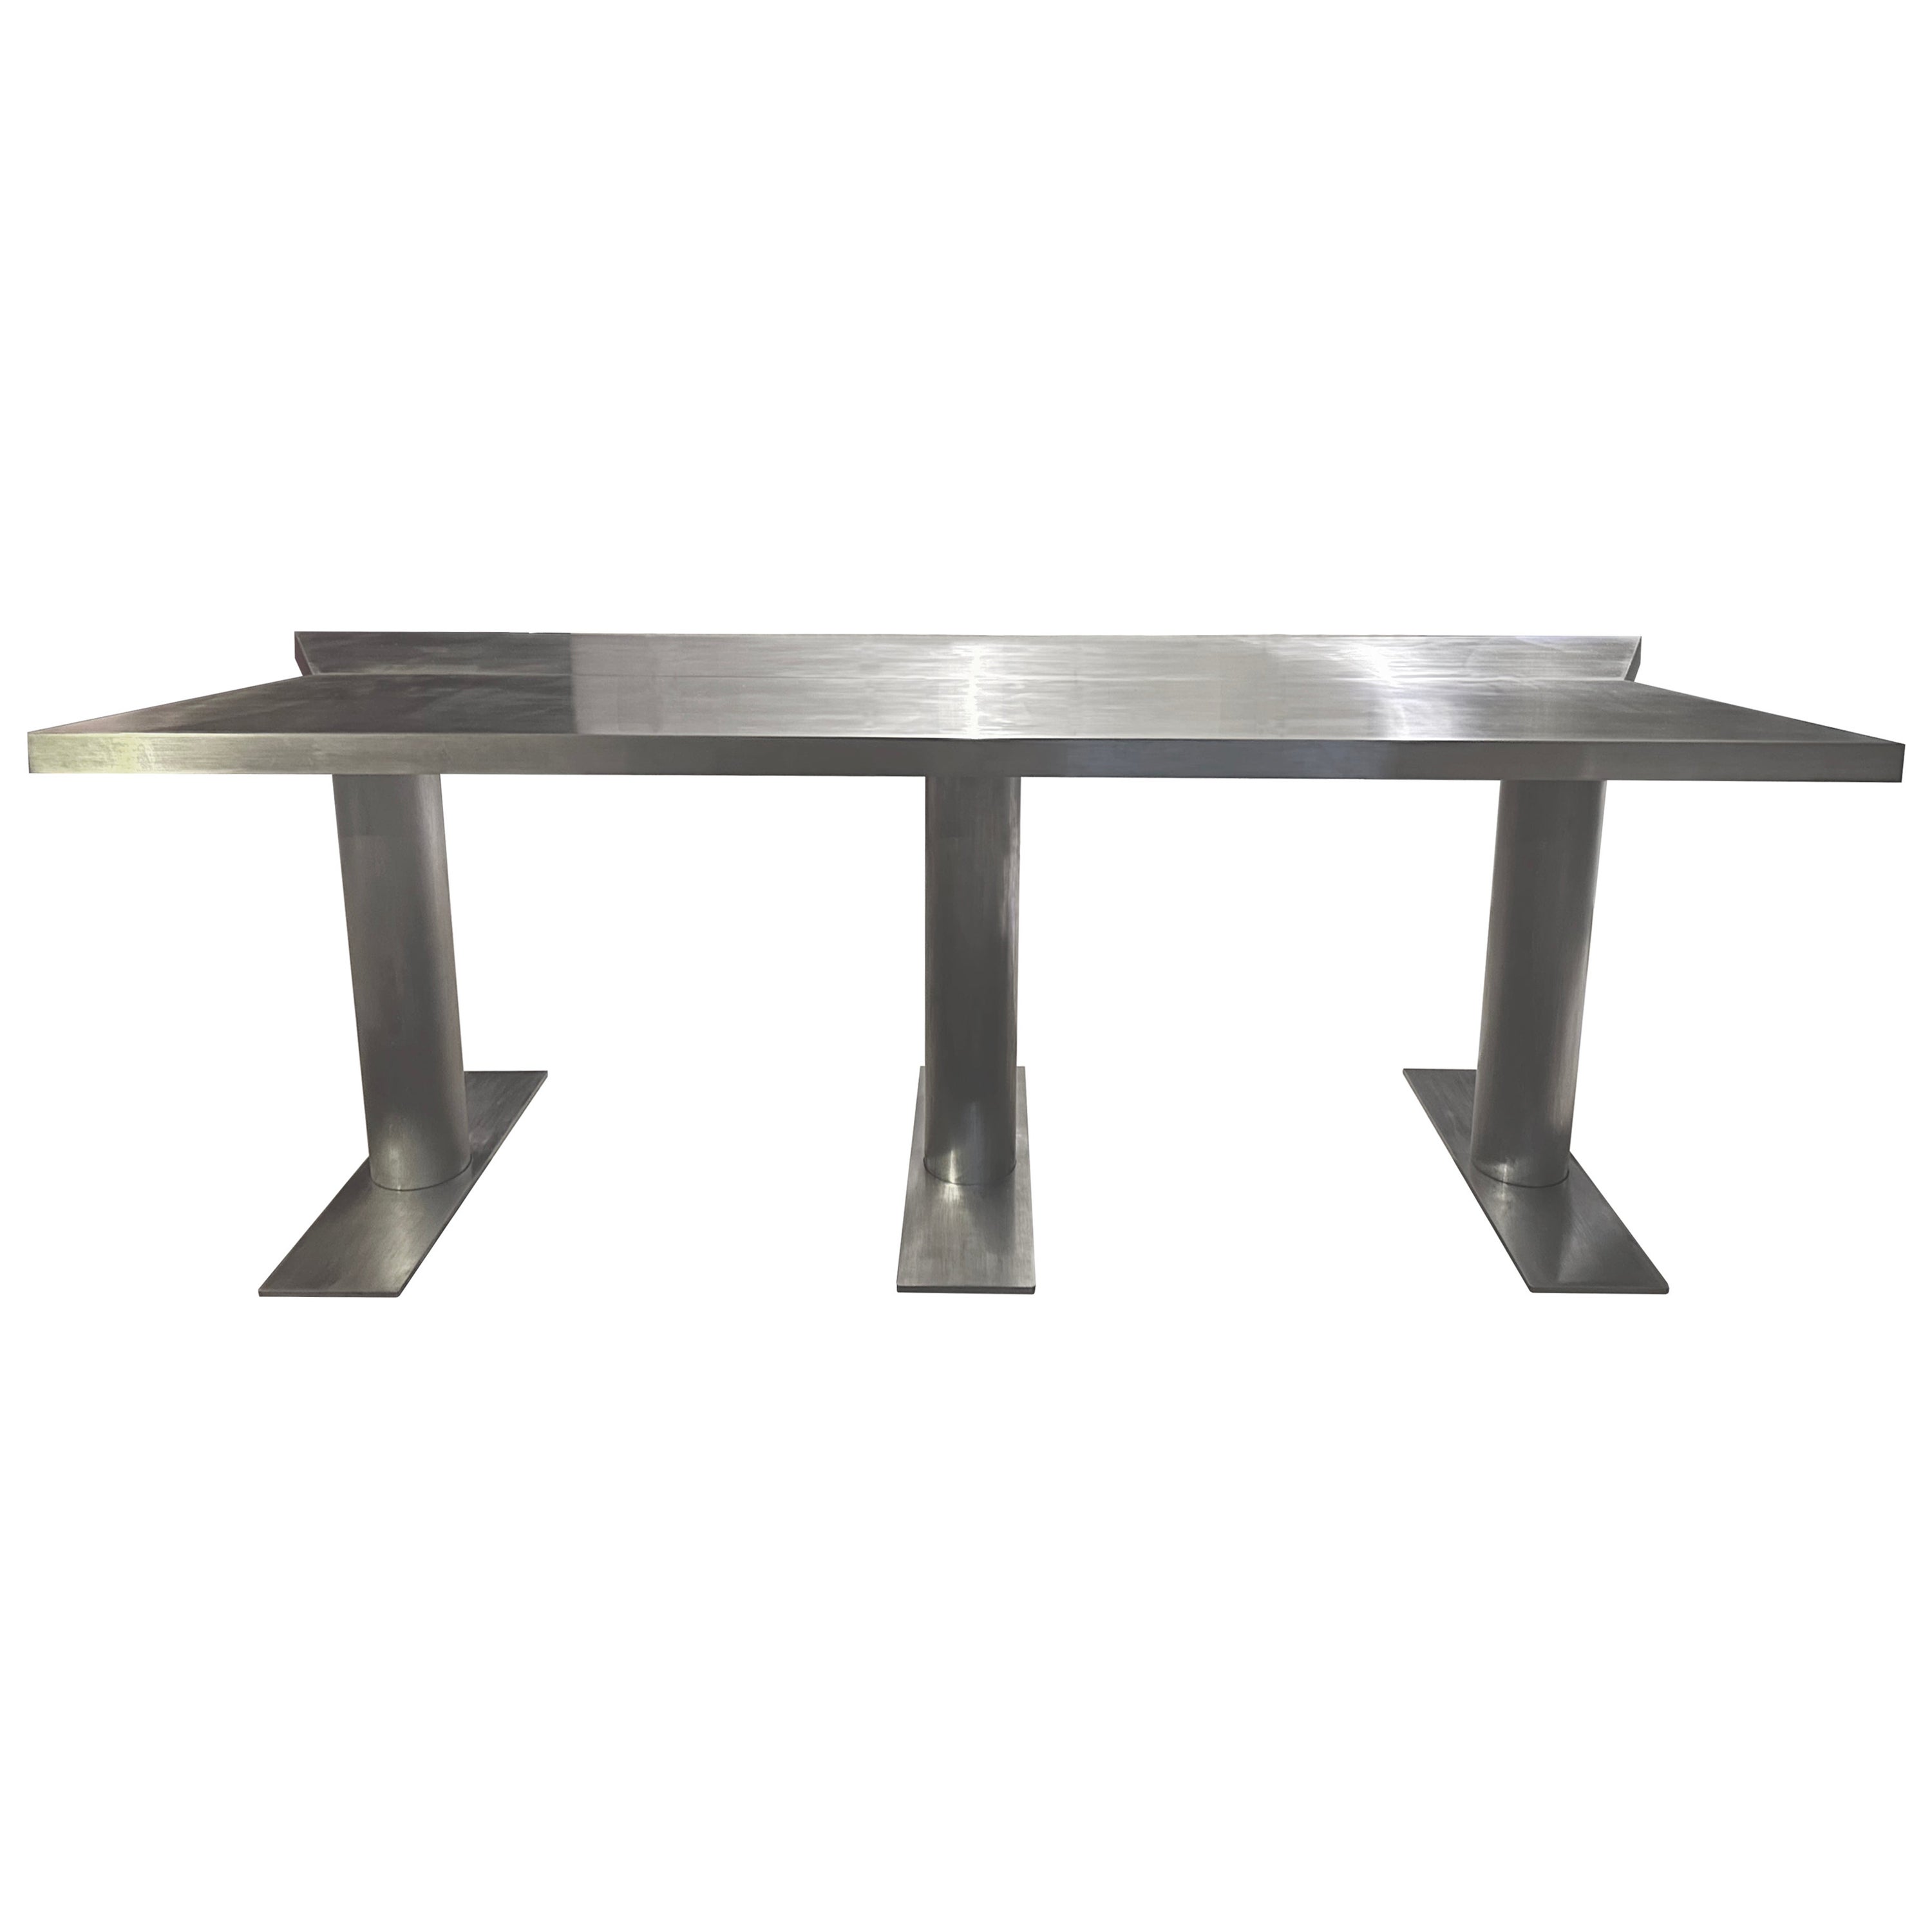 “Running Gun” Dining Table, Iron, James Vincent Milano, Italy, 2023 For Sale